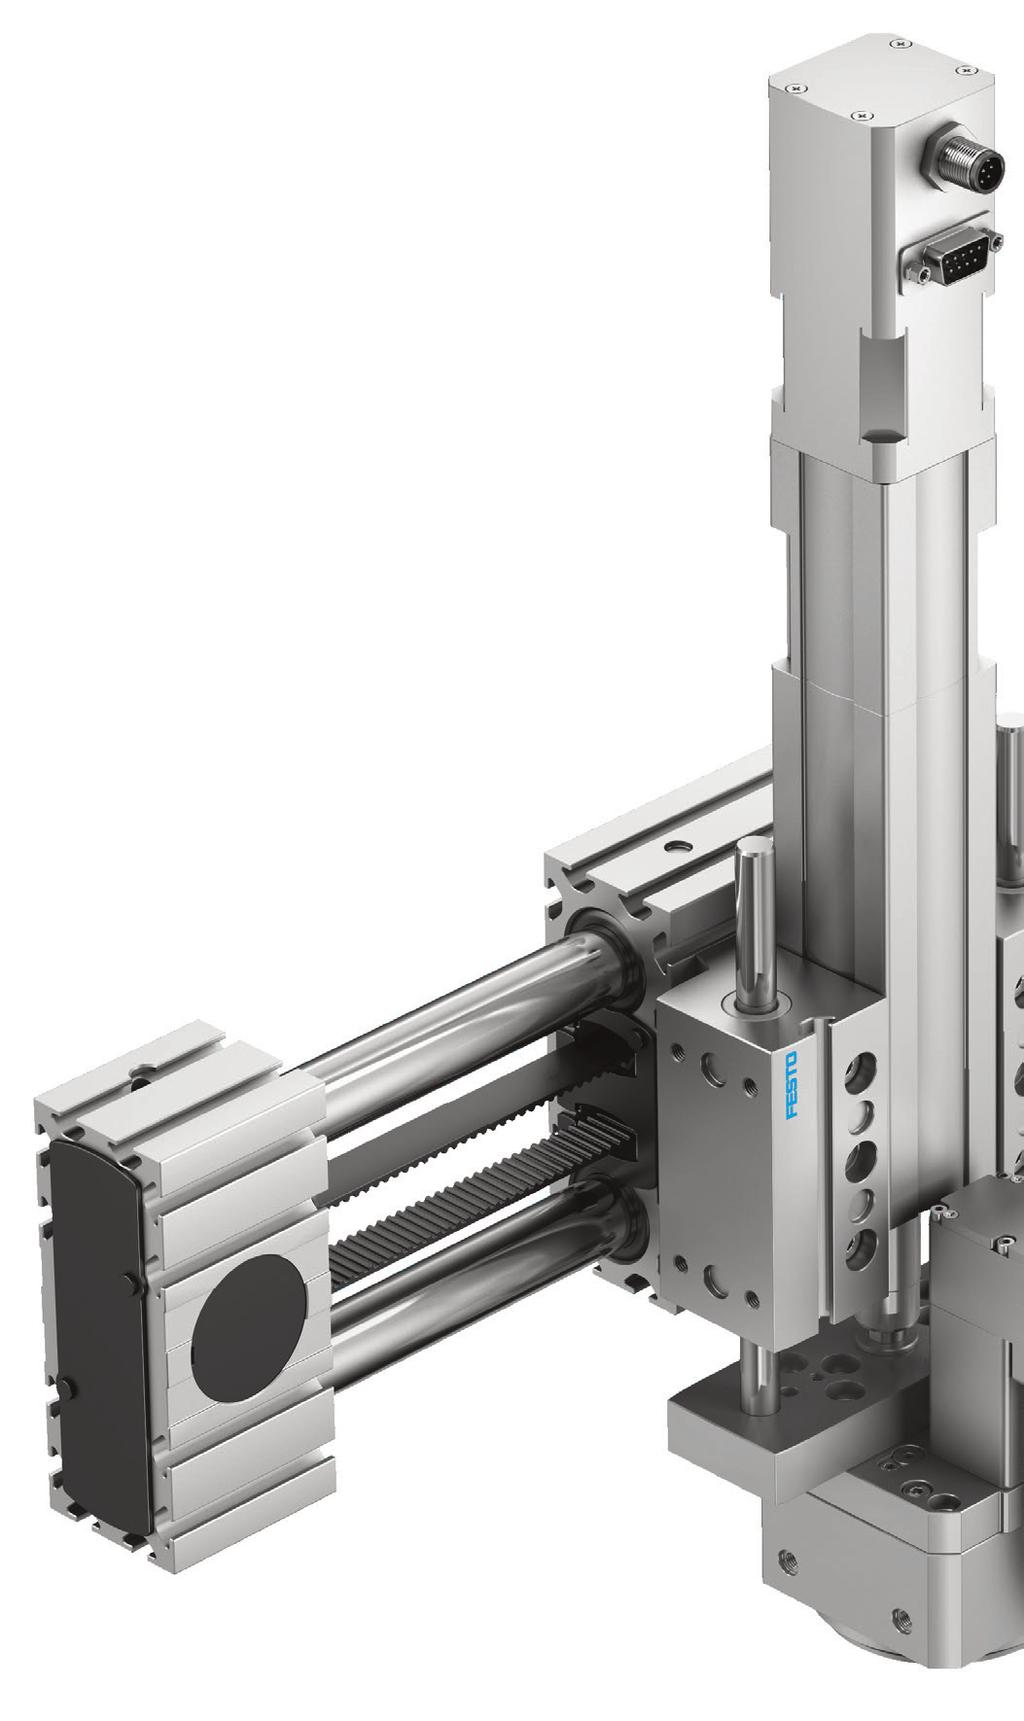 Optimized Motion Series gantries Multi-axis solutions made easy Quickly and conveniently create multi-axis solutions.